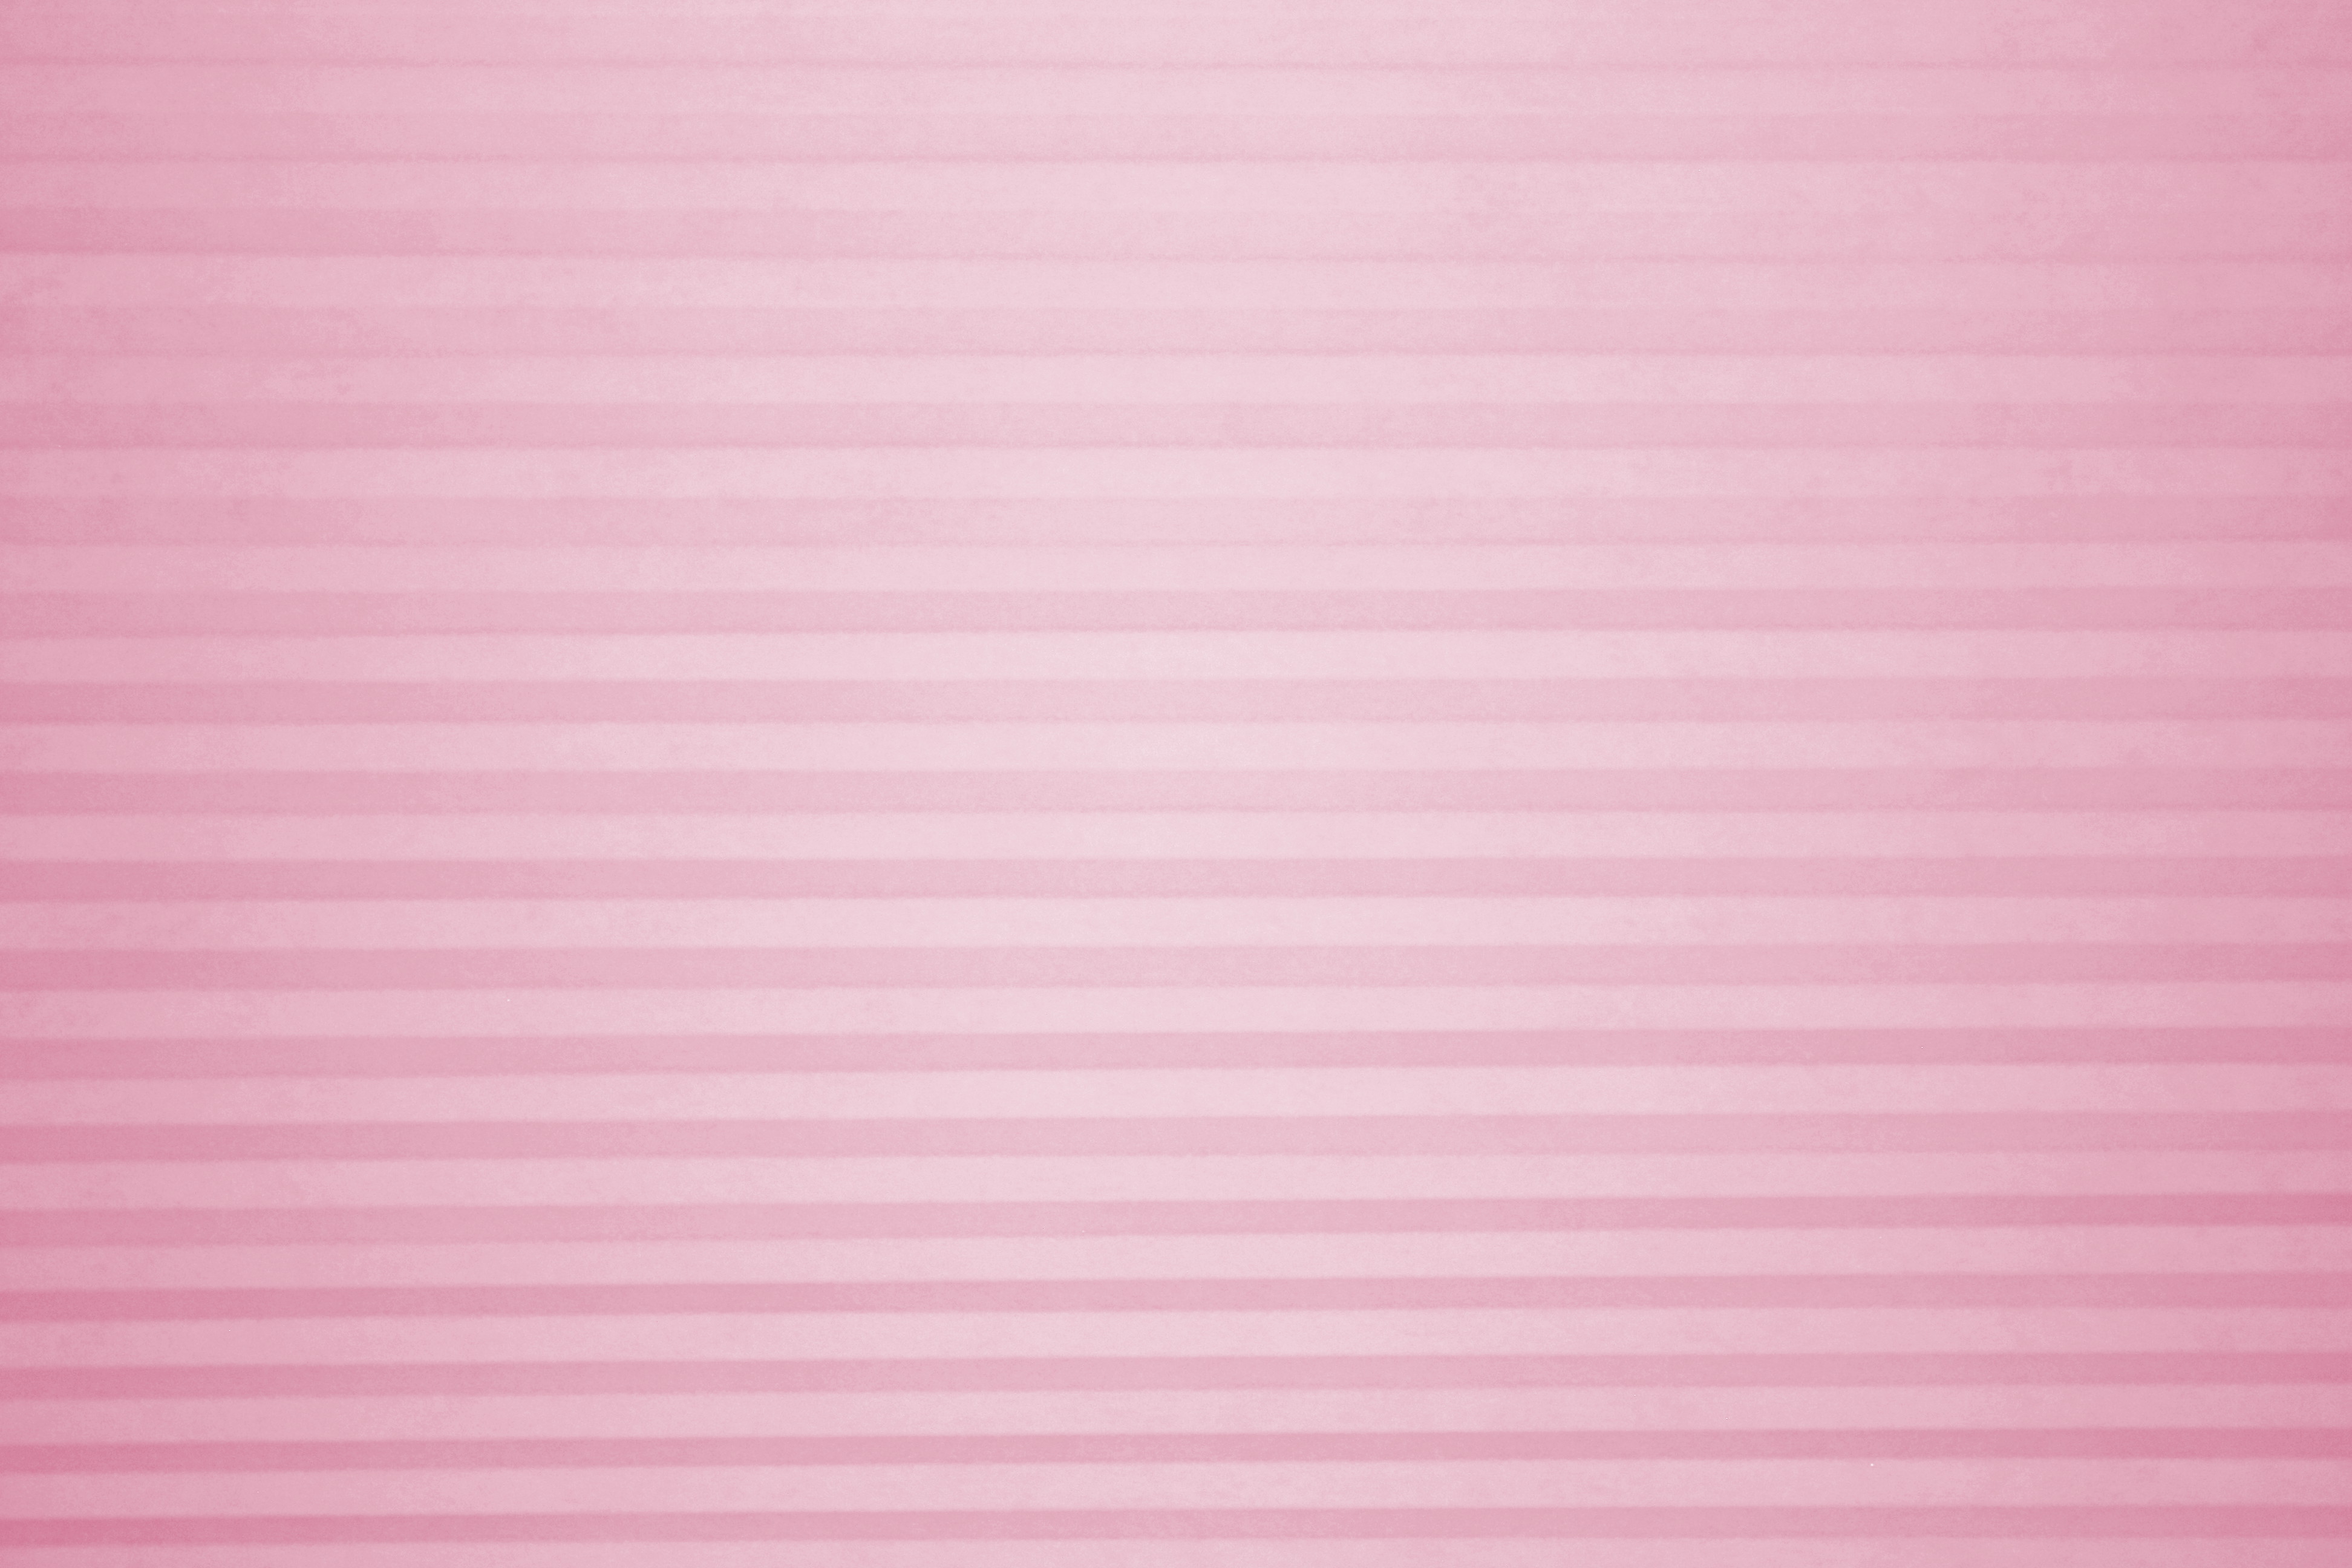 Pink Cellular Shade Texture Picture | Free Photograph | Photos ...